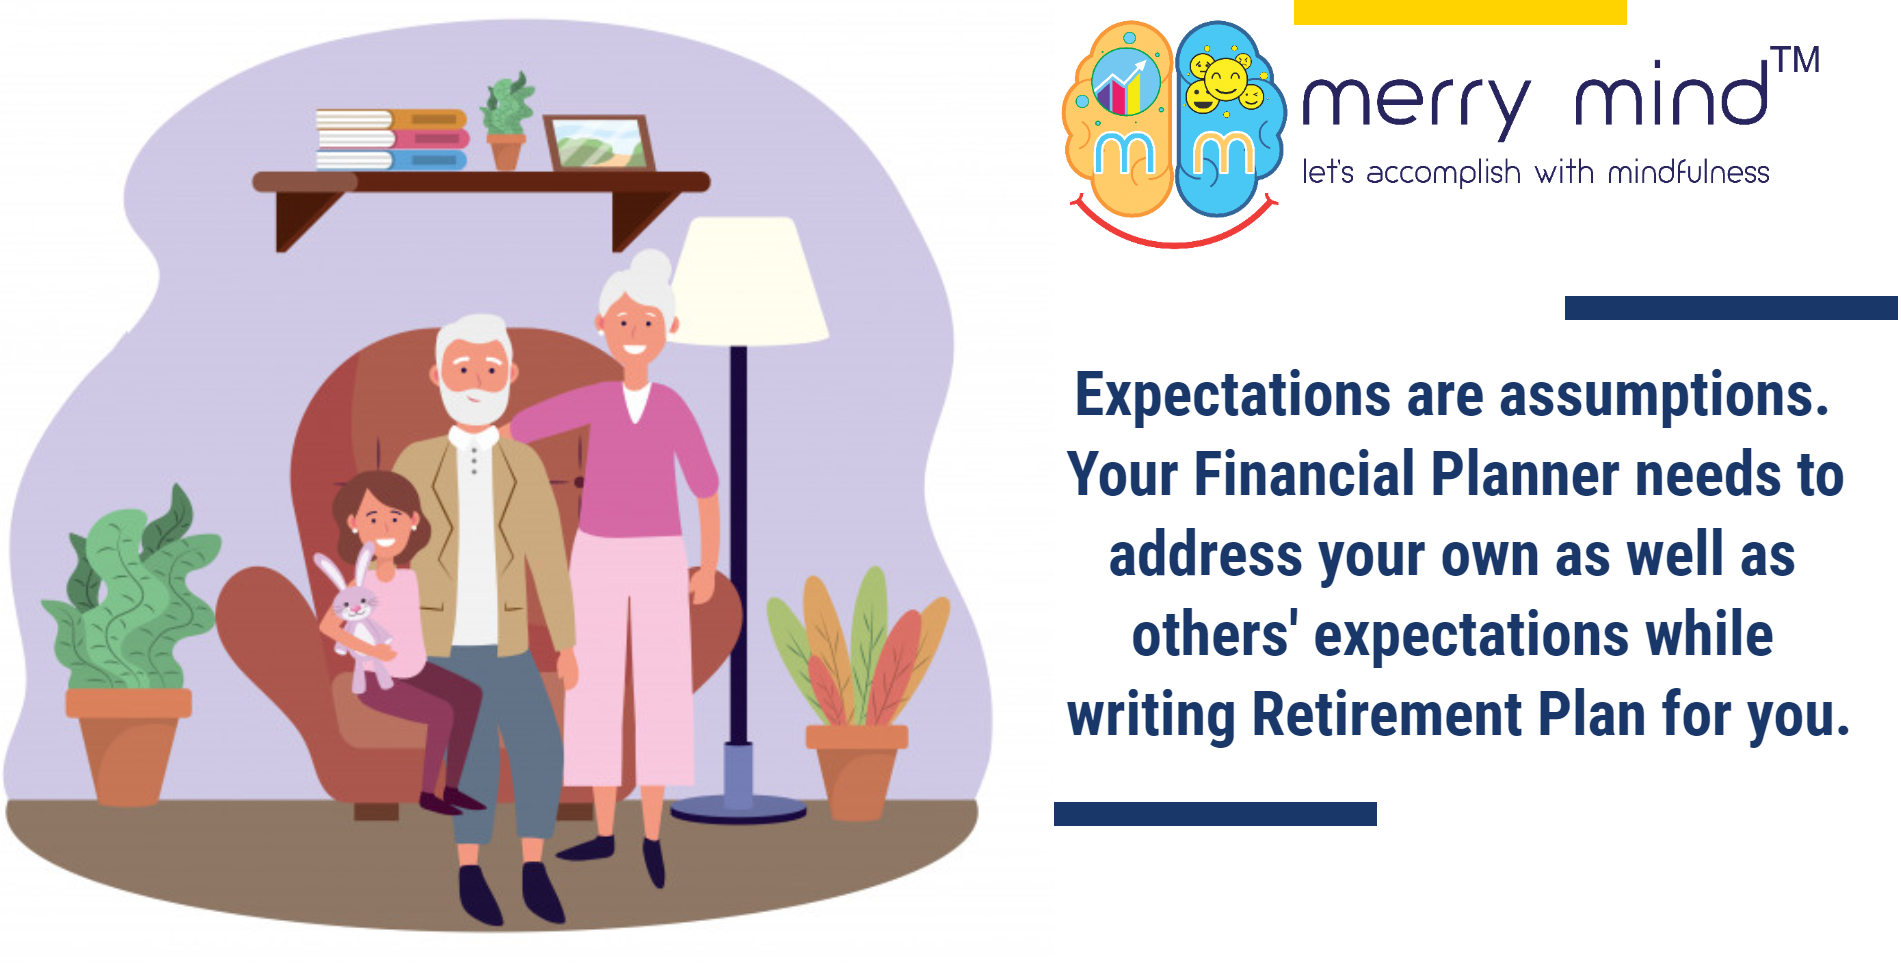 Retirement Planner works with you to address your personal factors and guides you to minimize assumptions and implement the Retirement Plan